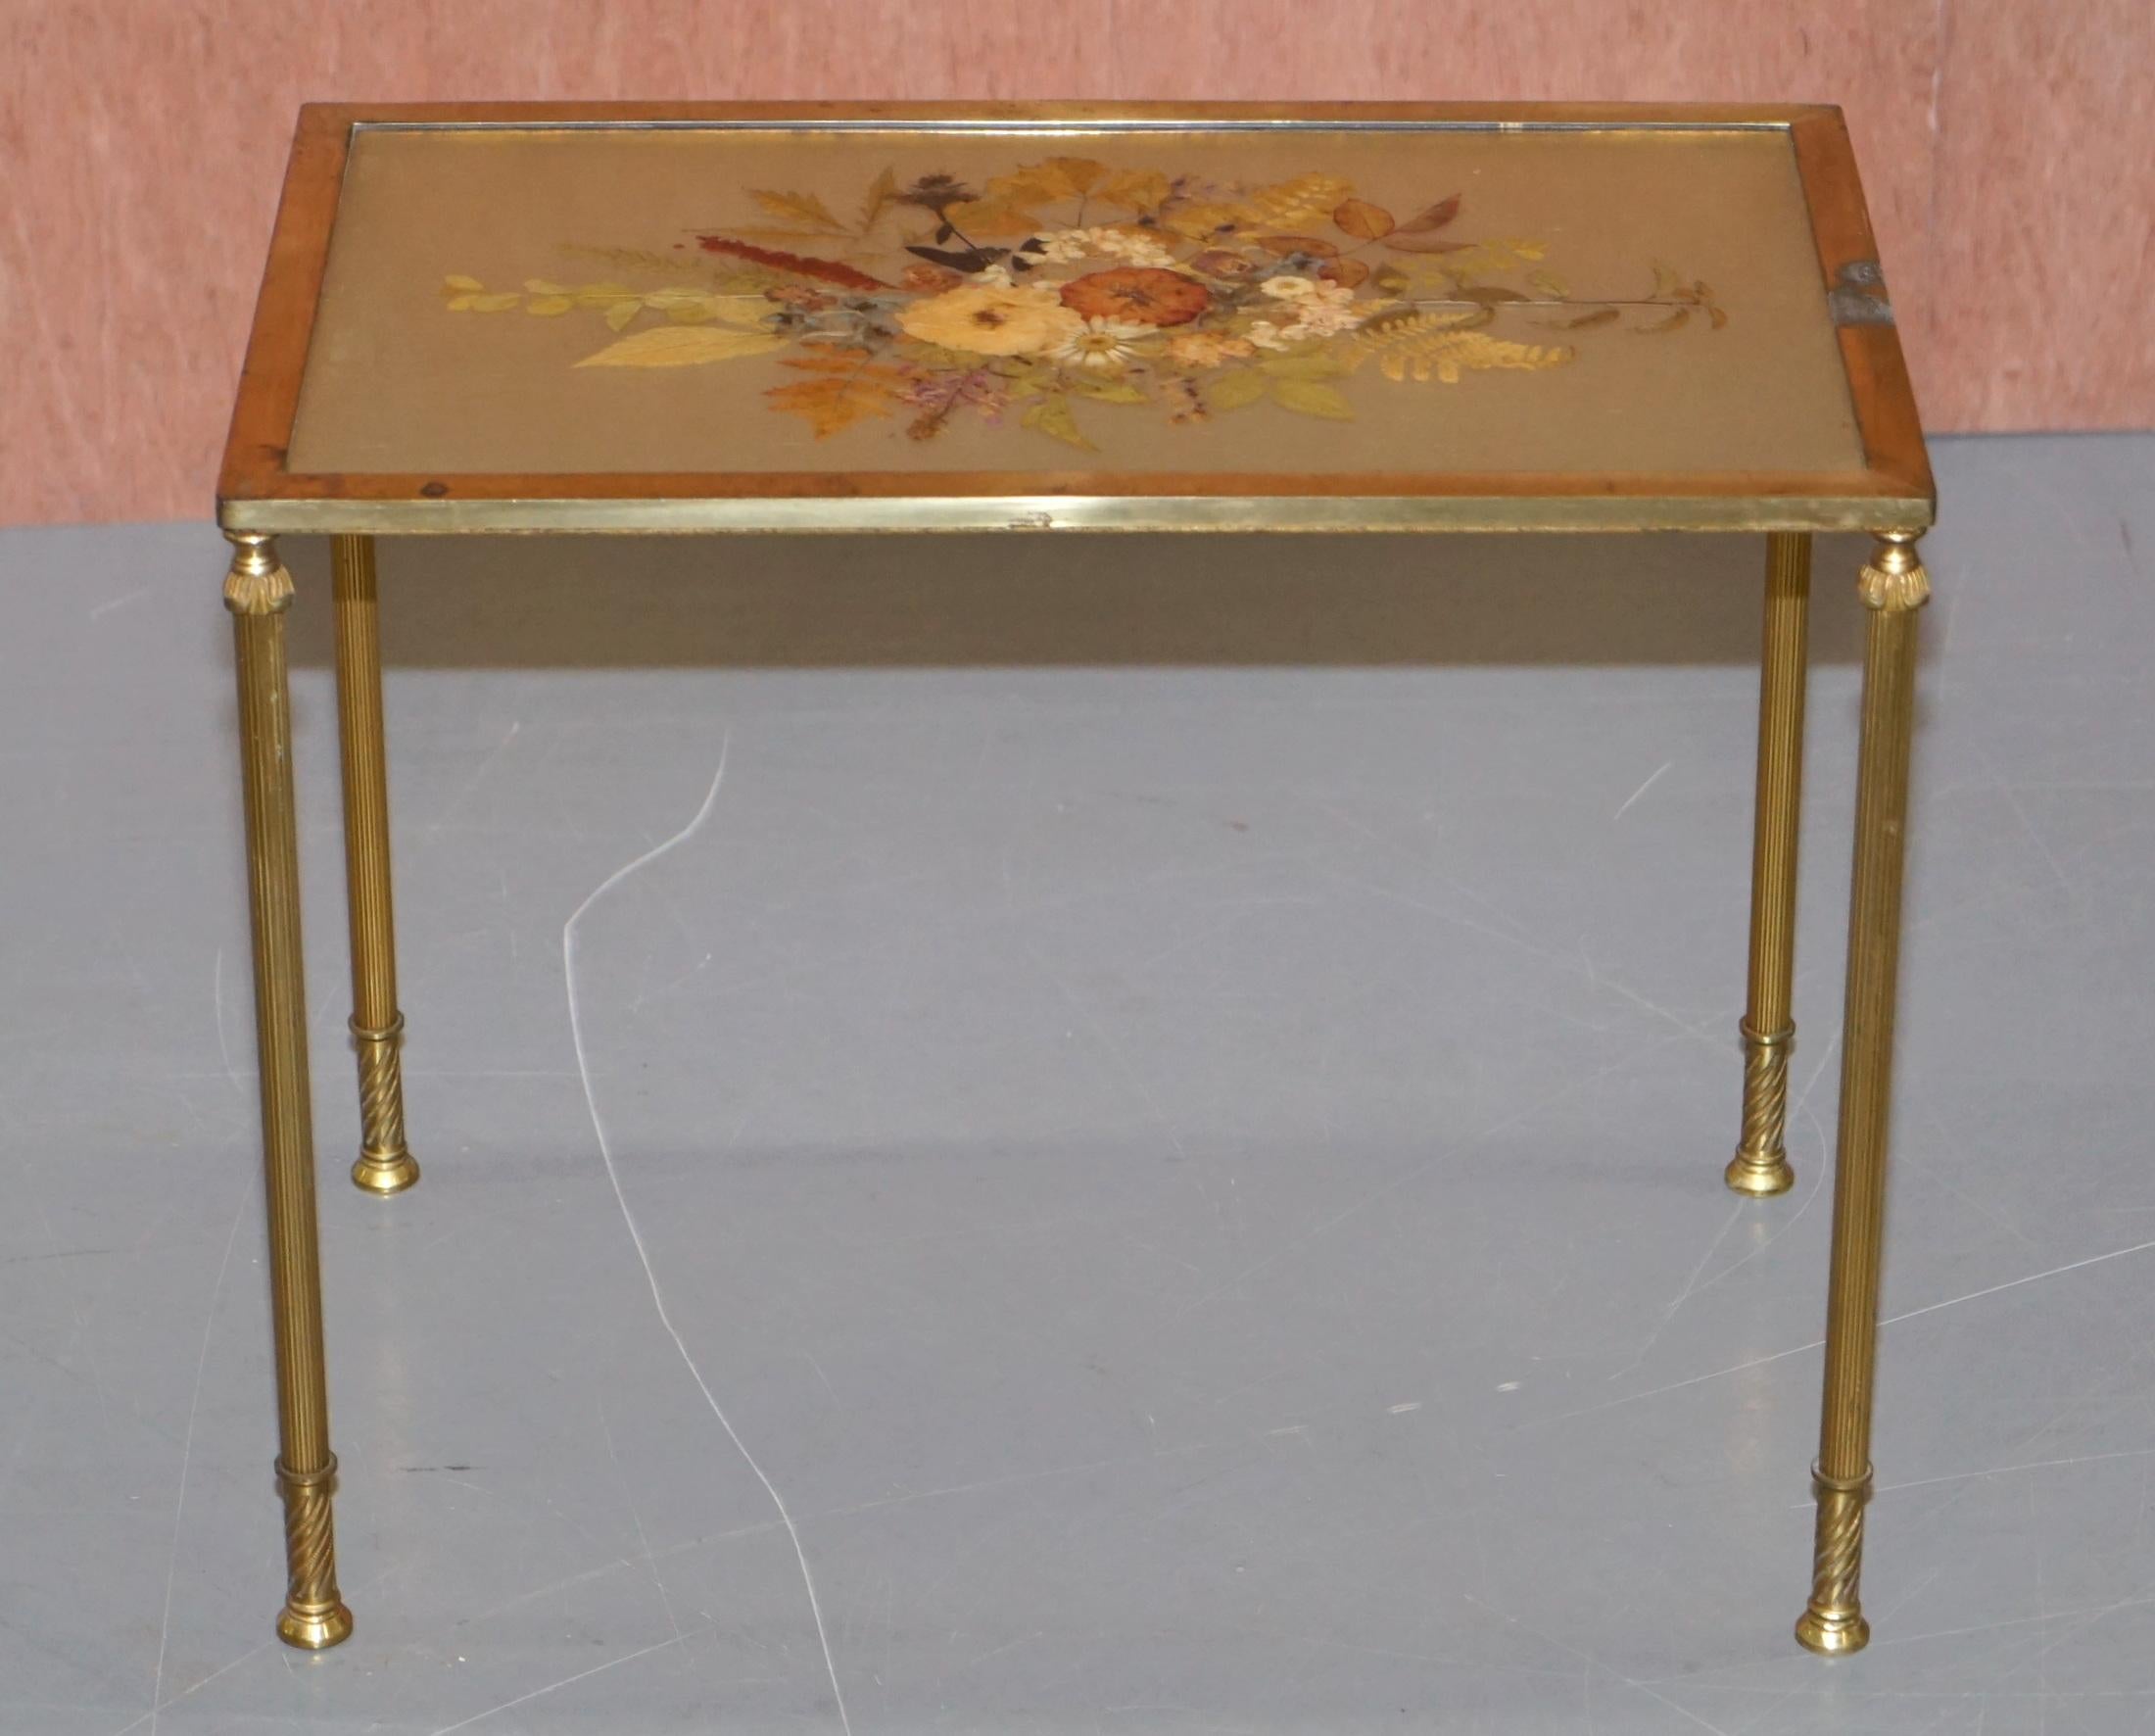 Stunning Nest of Three French circa 1920 Bronze Pressed Flowers Tables Regency 3 For Sale 7